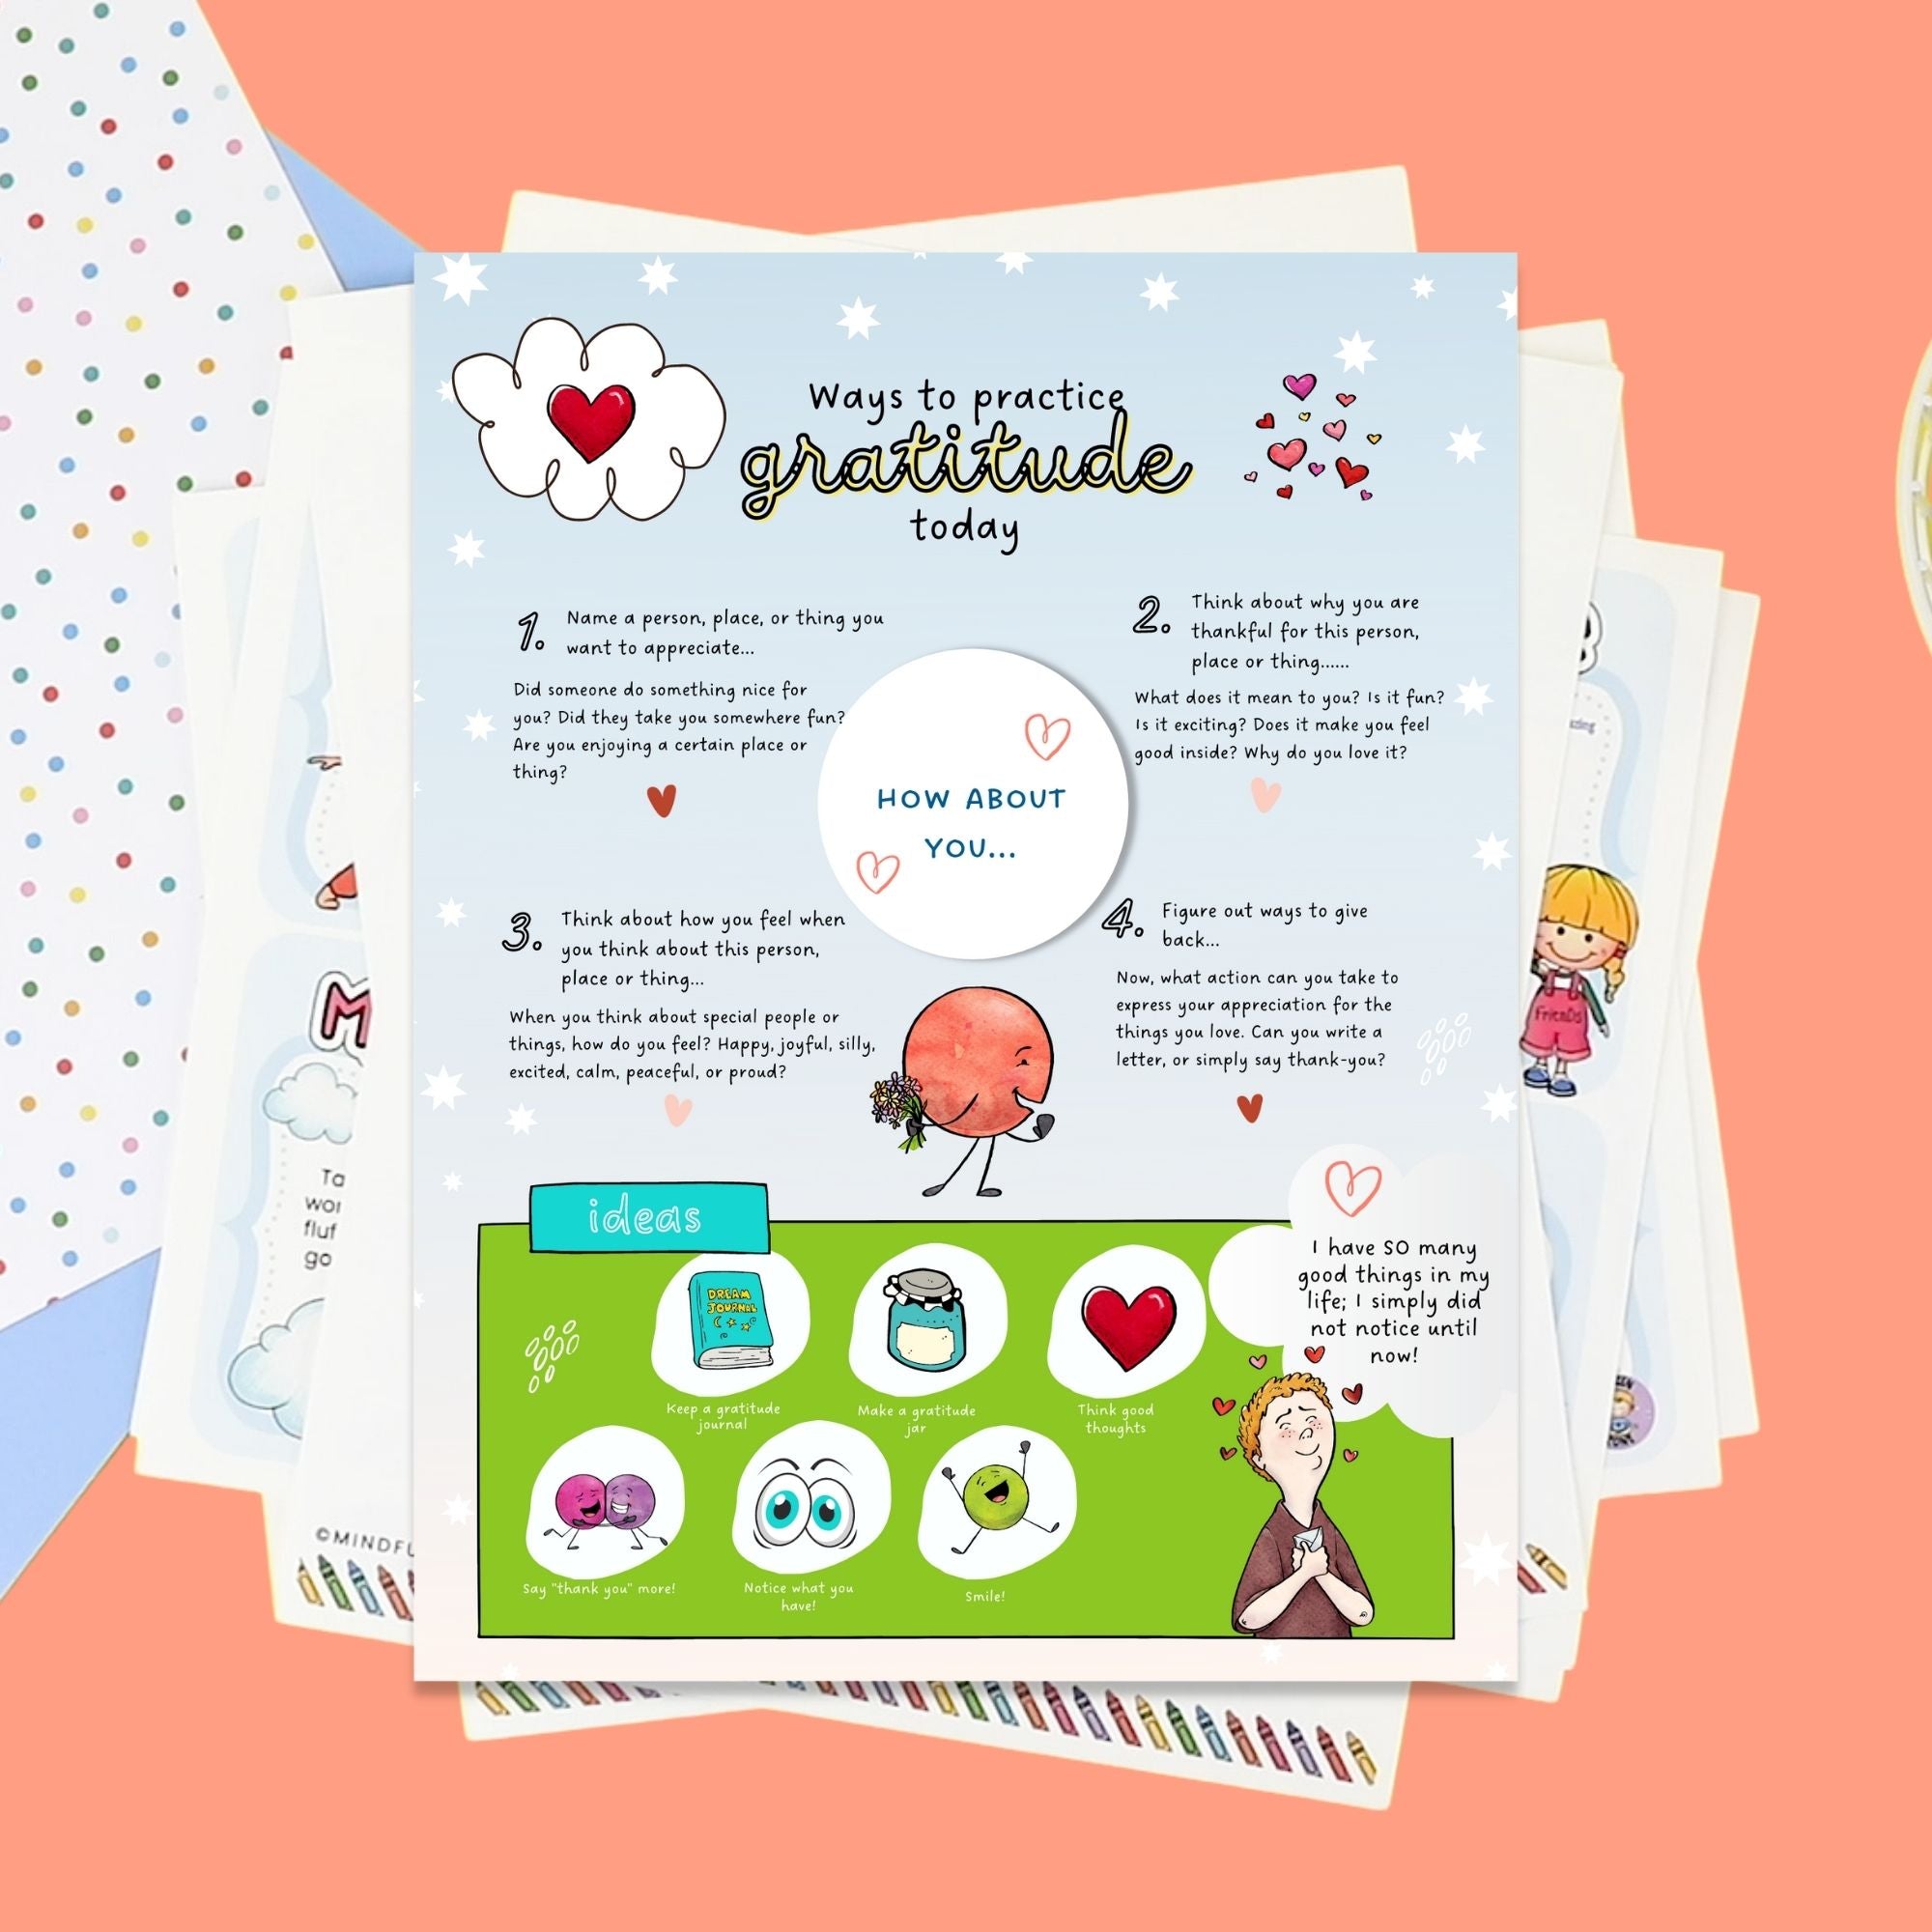 Gratitude Toolkit for Kids PDF (ages 4-11)